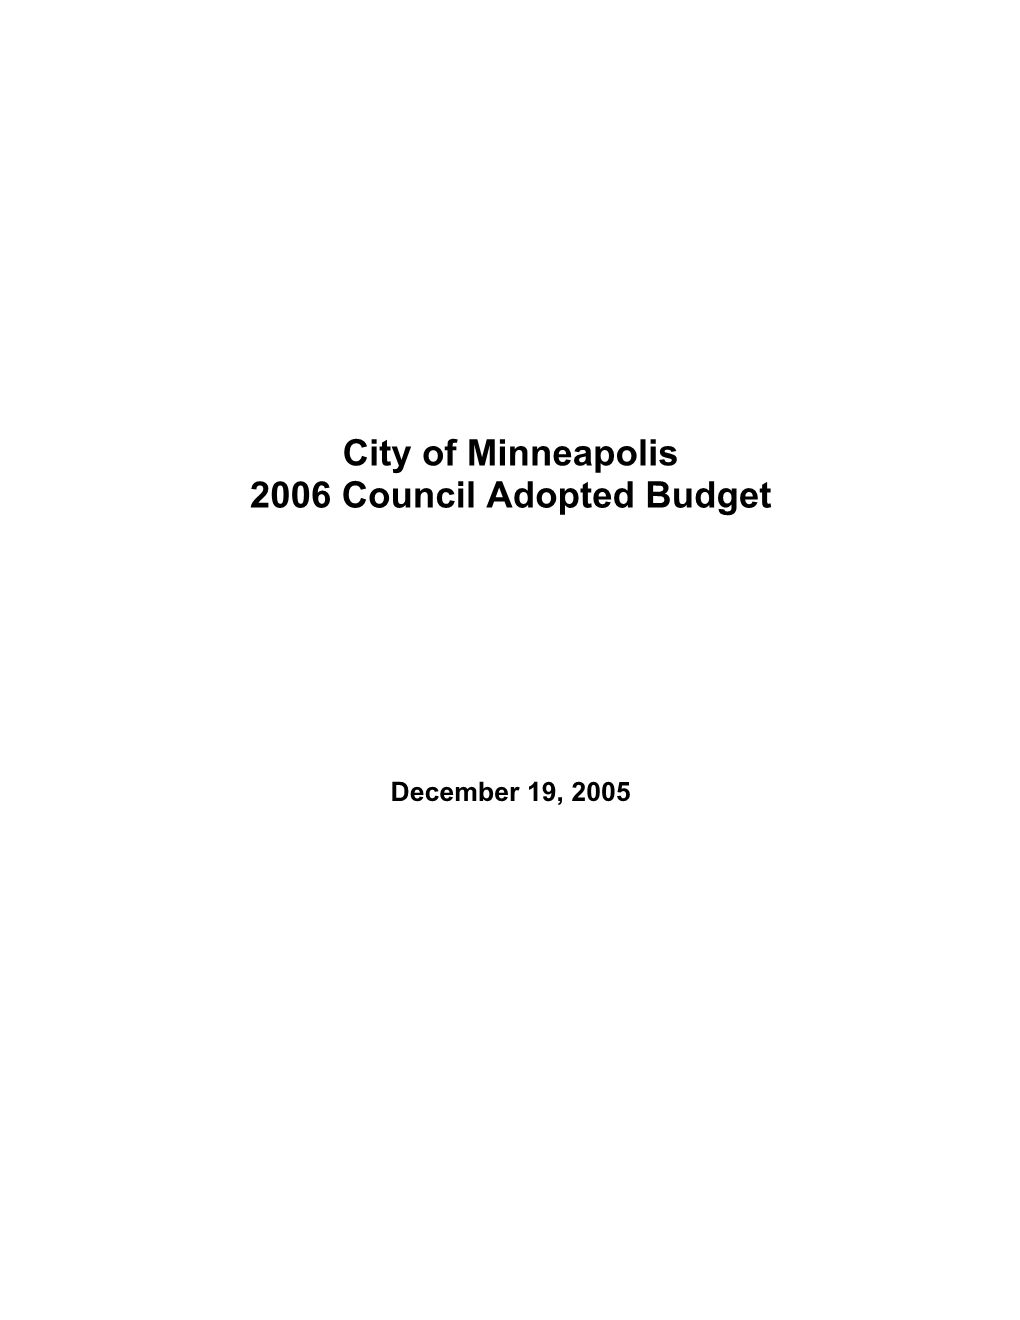 2006 Council Adopted Budget